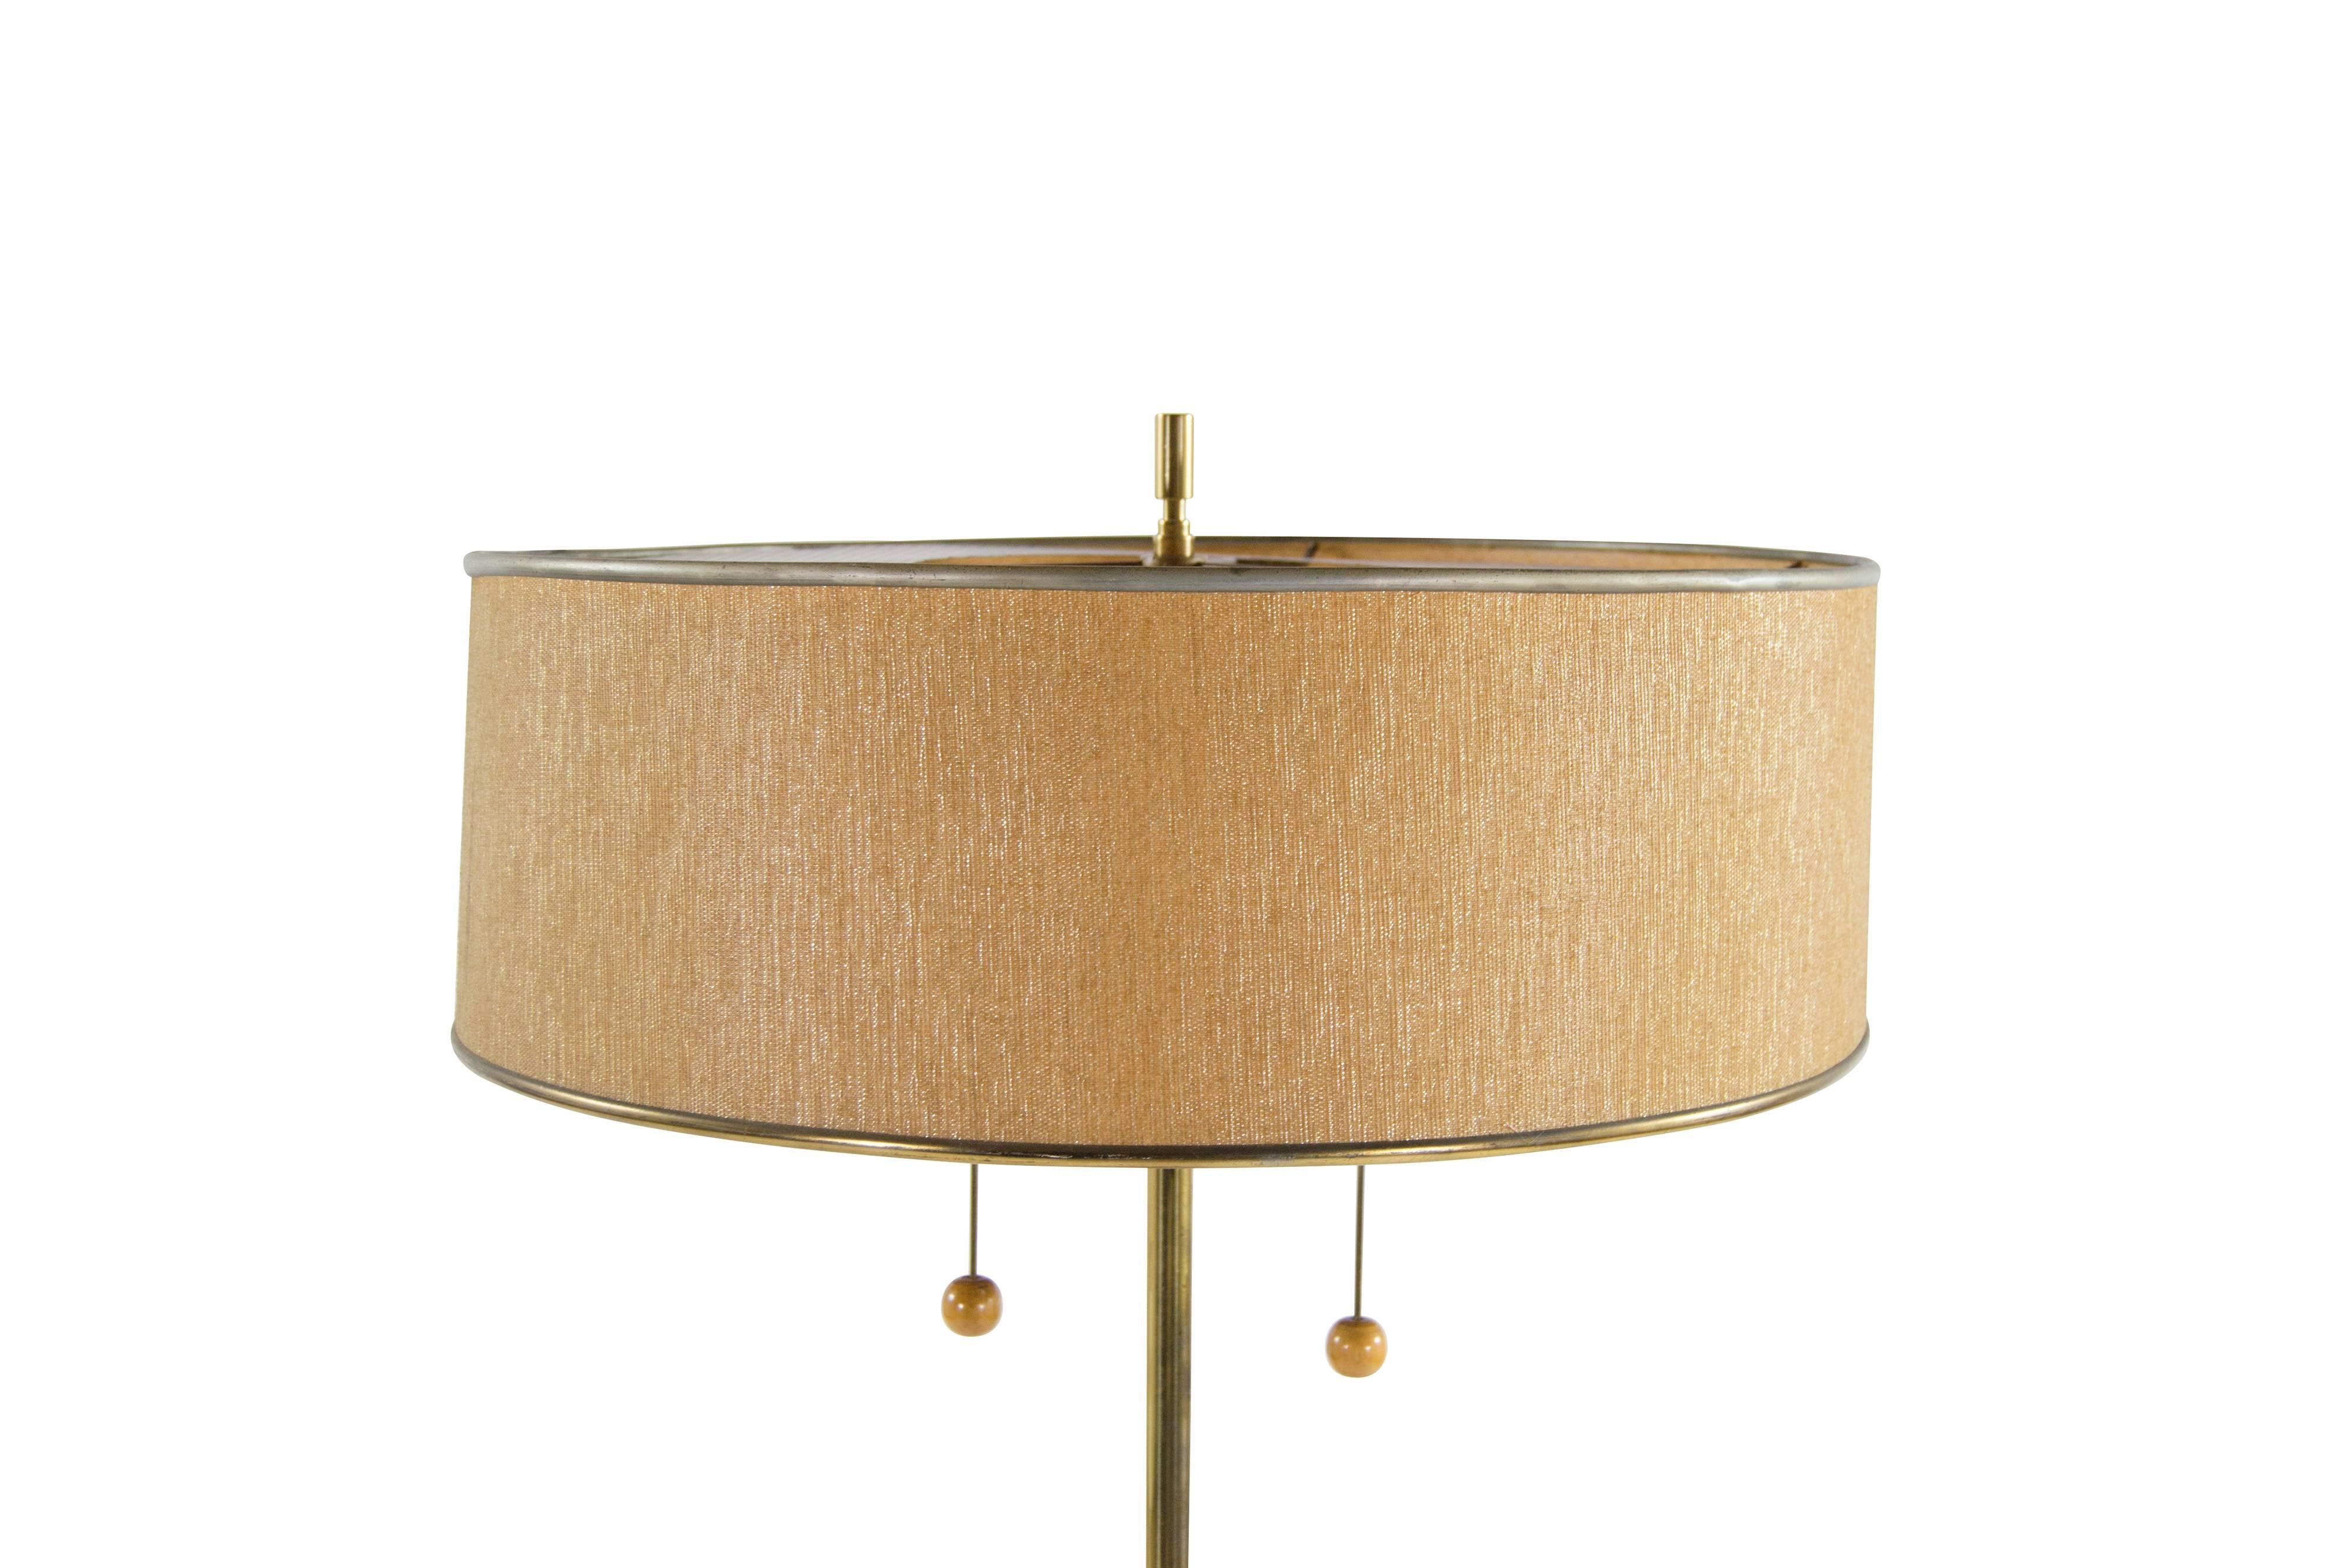 Brass and walnut floor lamp with original shade designed by Gerald Thurston for Lightolier, circa 1950s. Newly rewired.